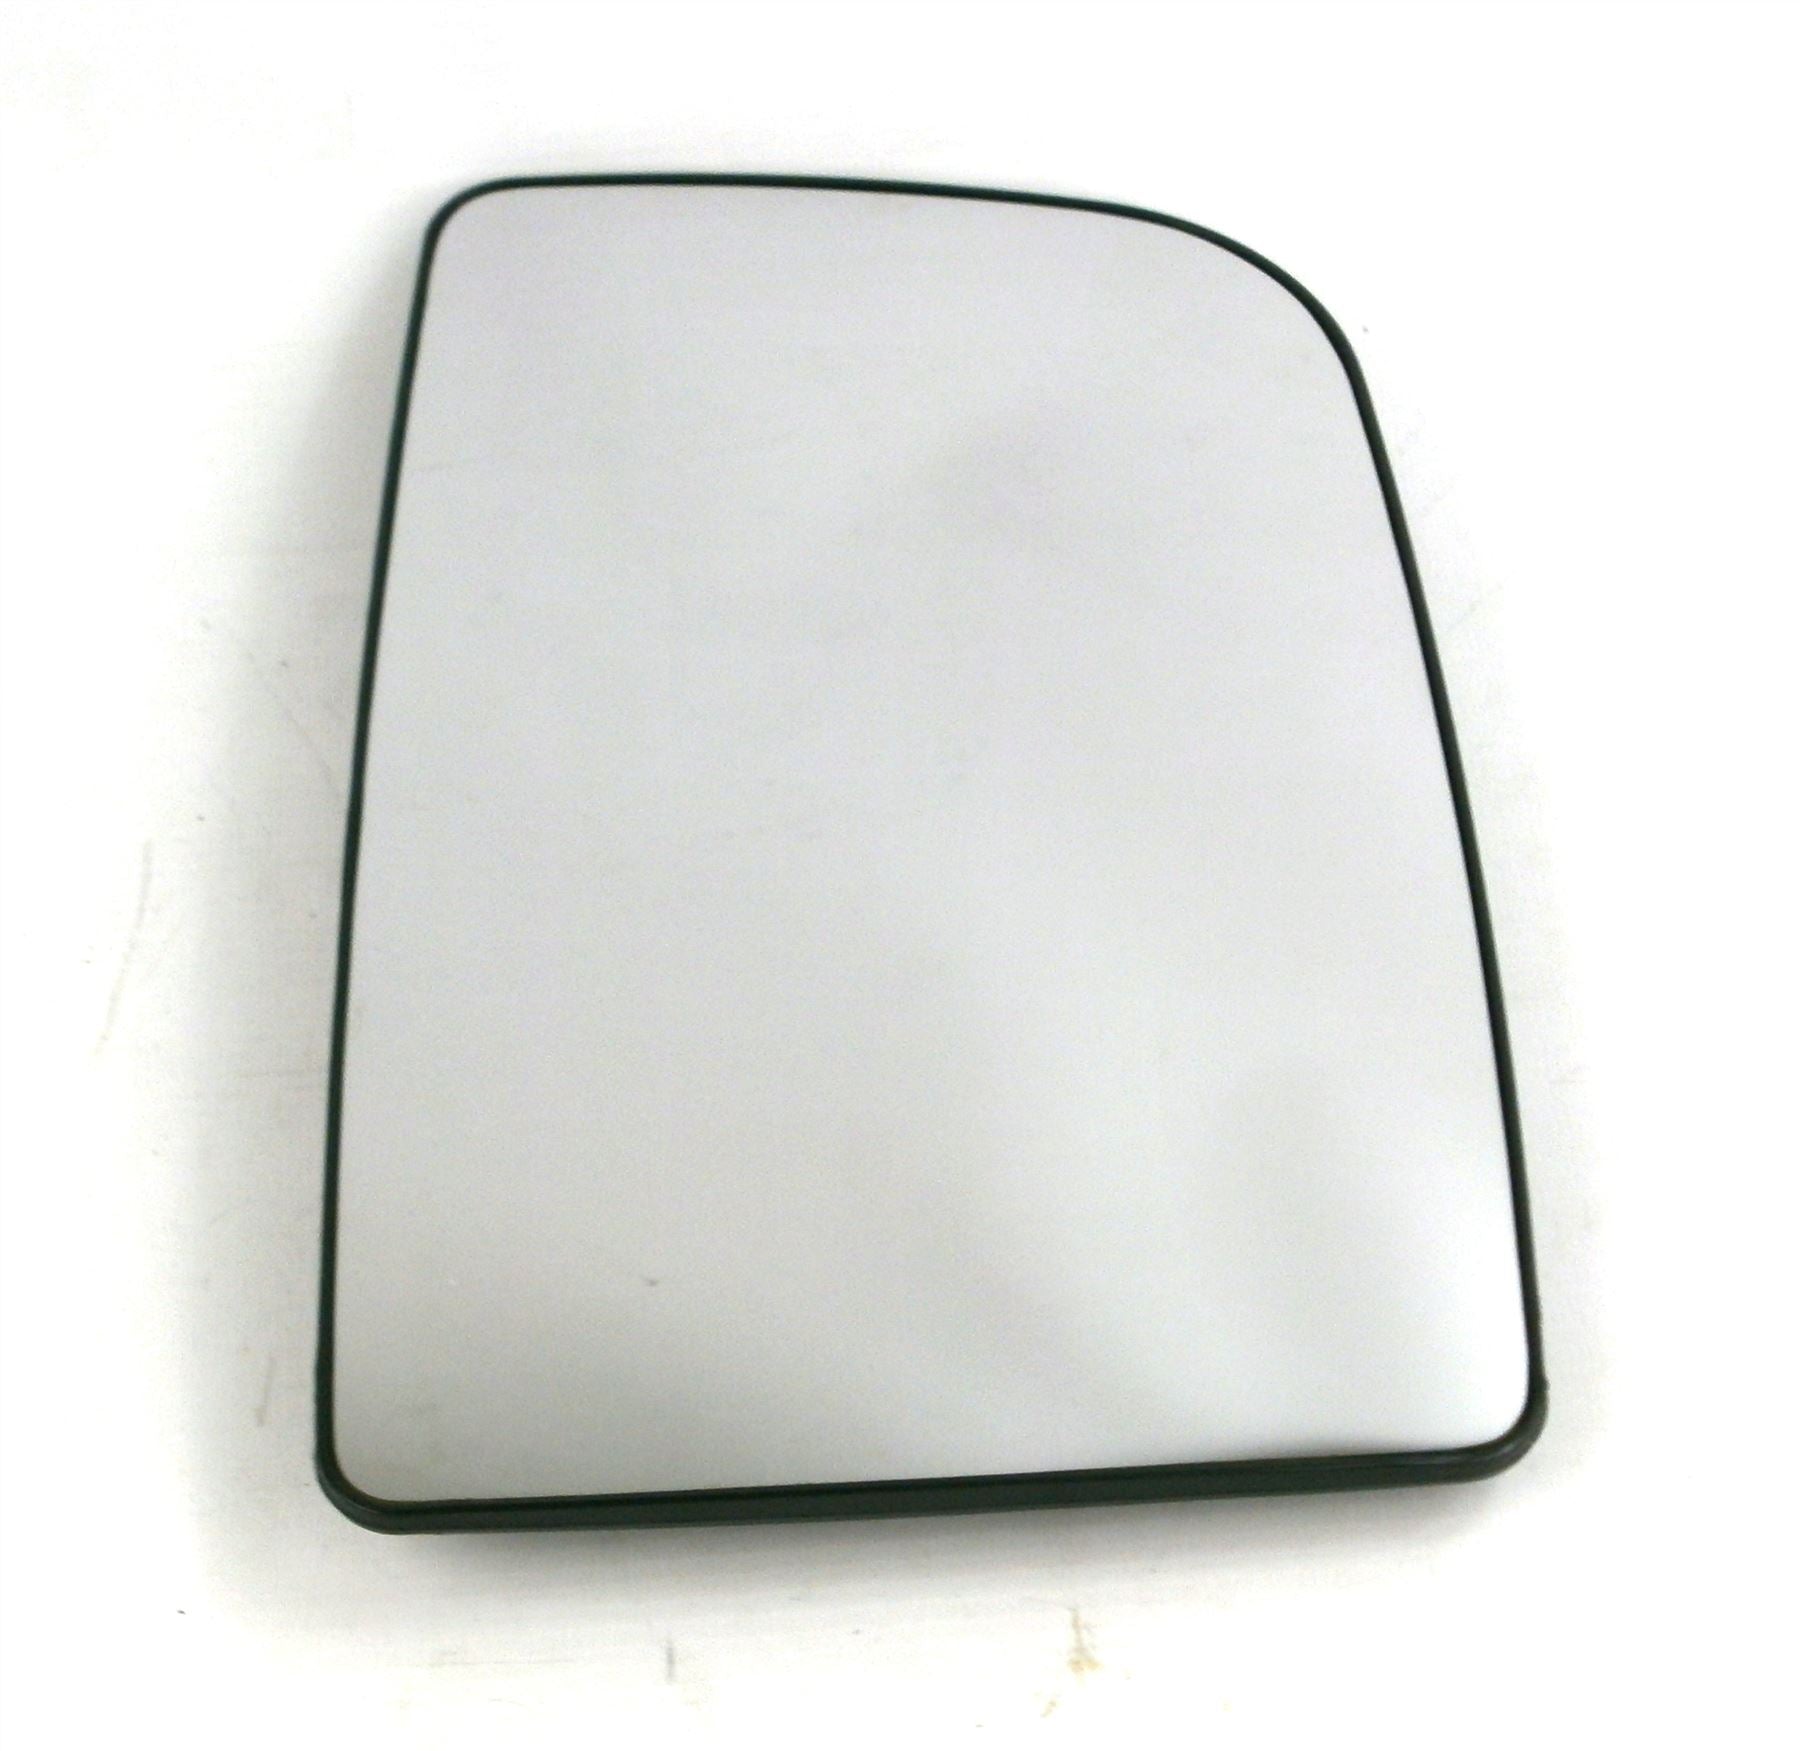 Volkswagen Crafter 2006-12/2018 Non-Heated Convex Upper Mirror Glass Drivers Side O/S